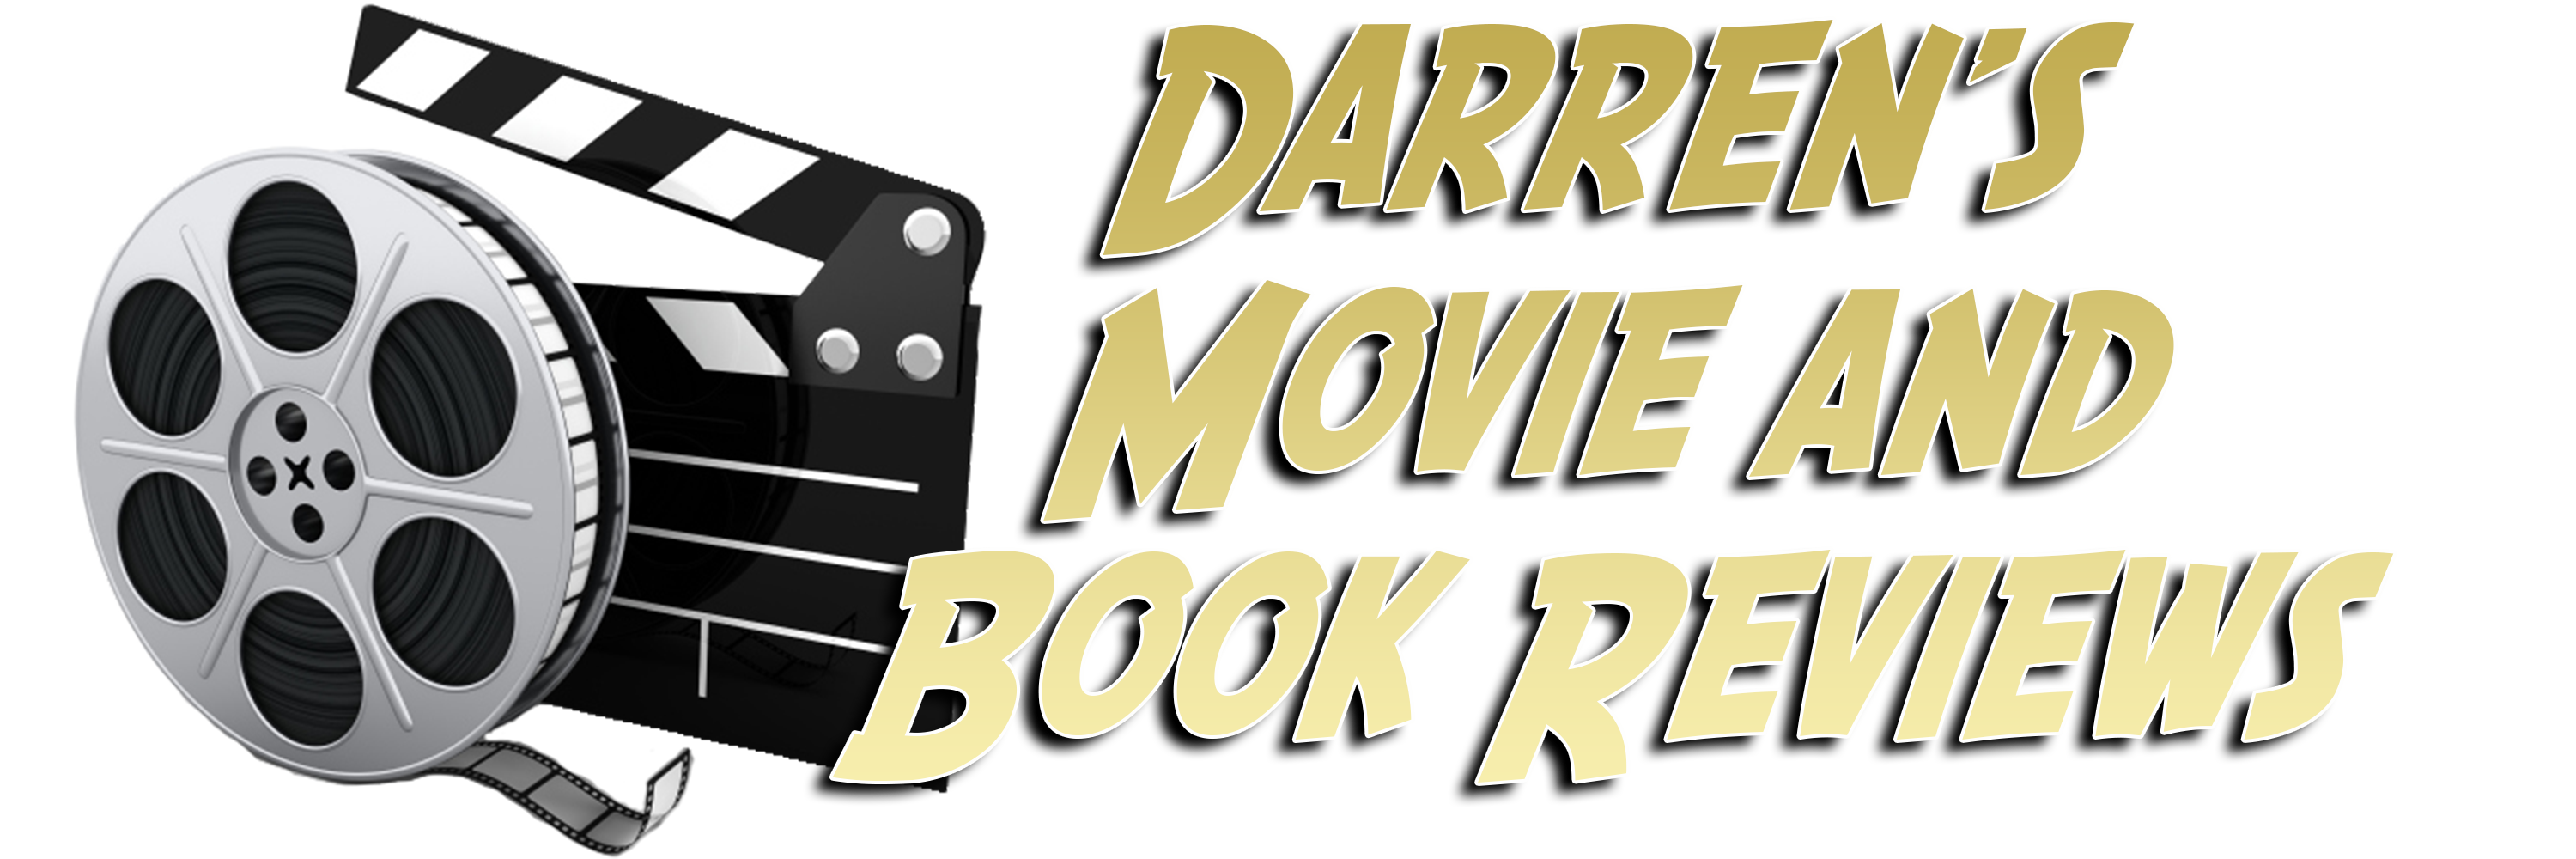 Darren's Movie and Book Reviews